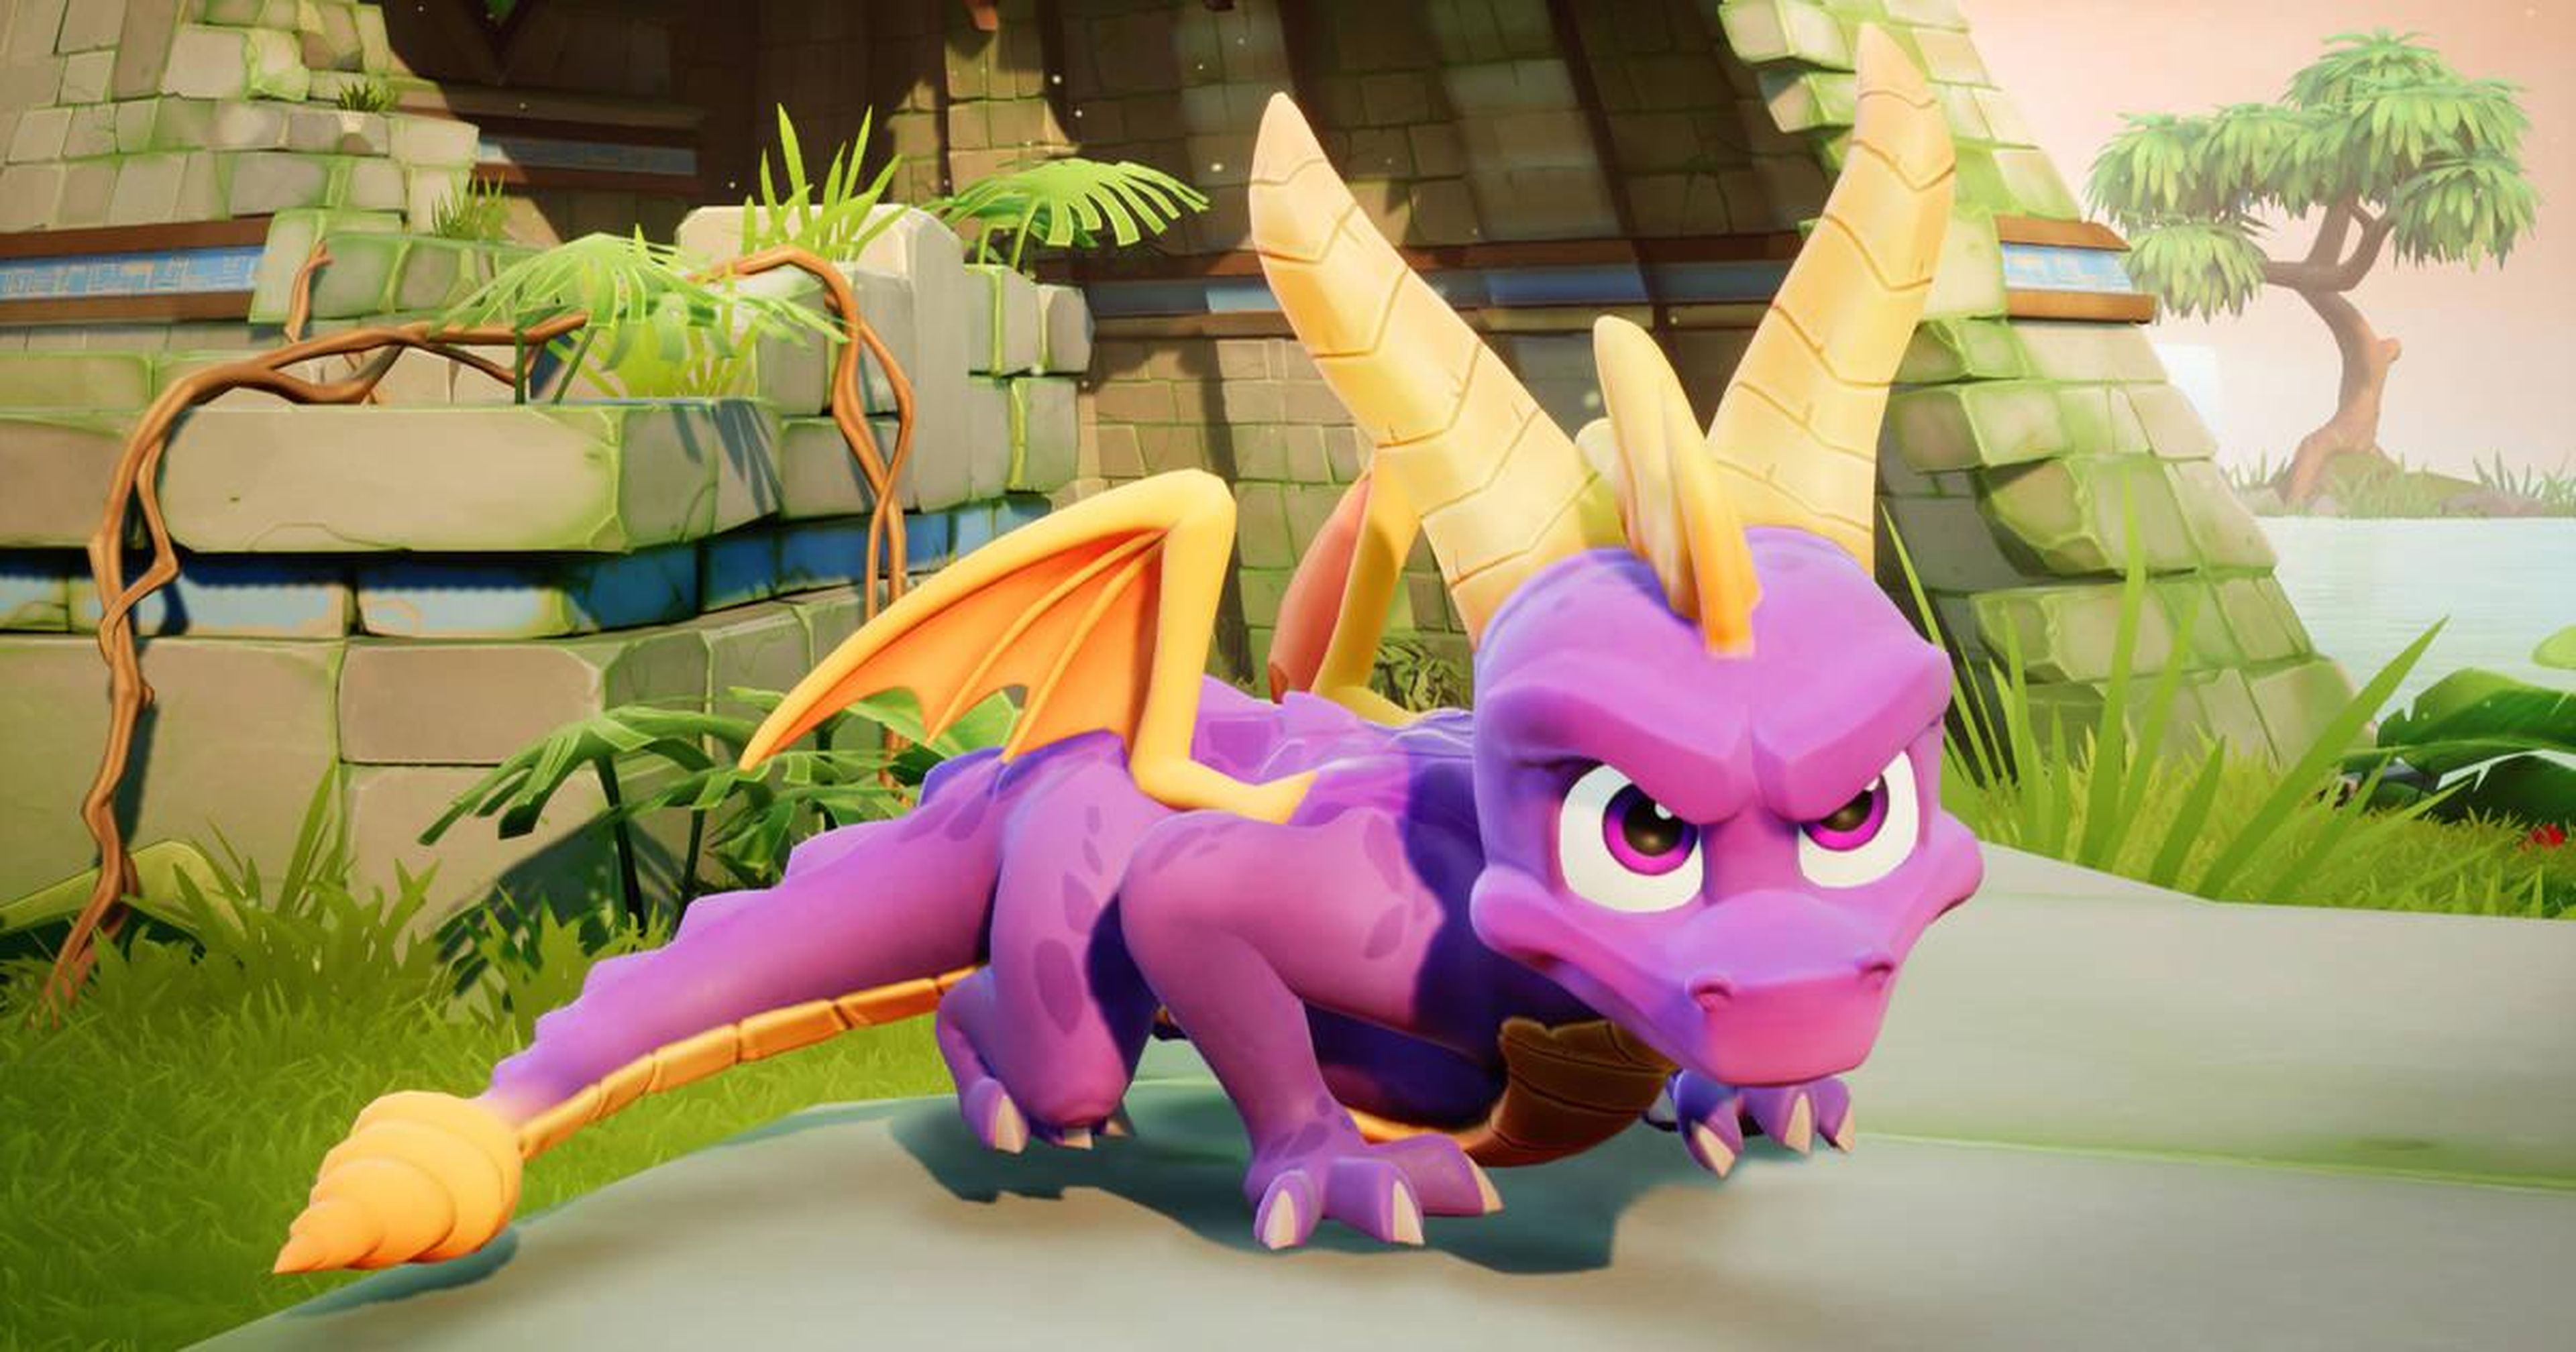 Spyro Reignited Trilogy - PS4 Gameplay Demo E3 2018